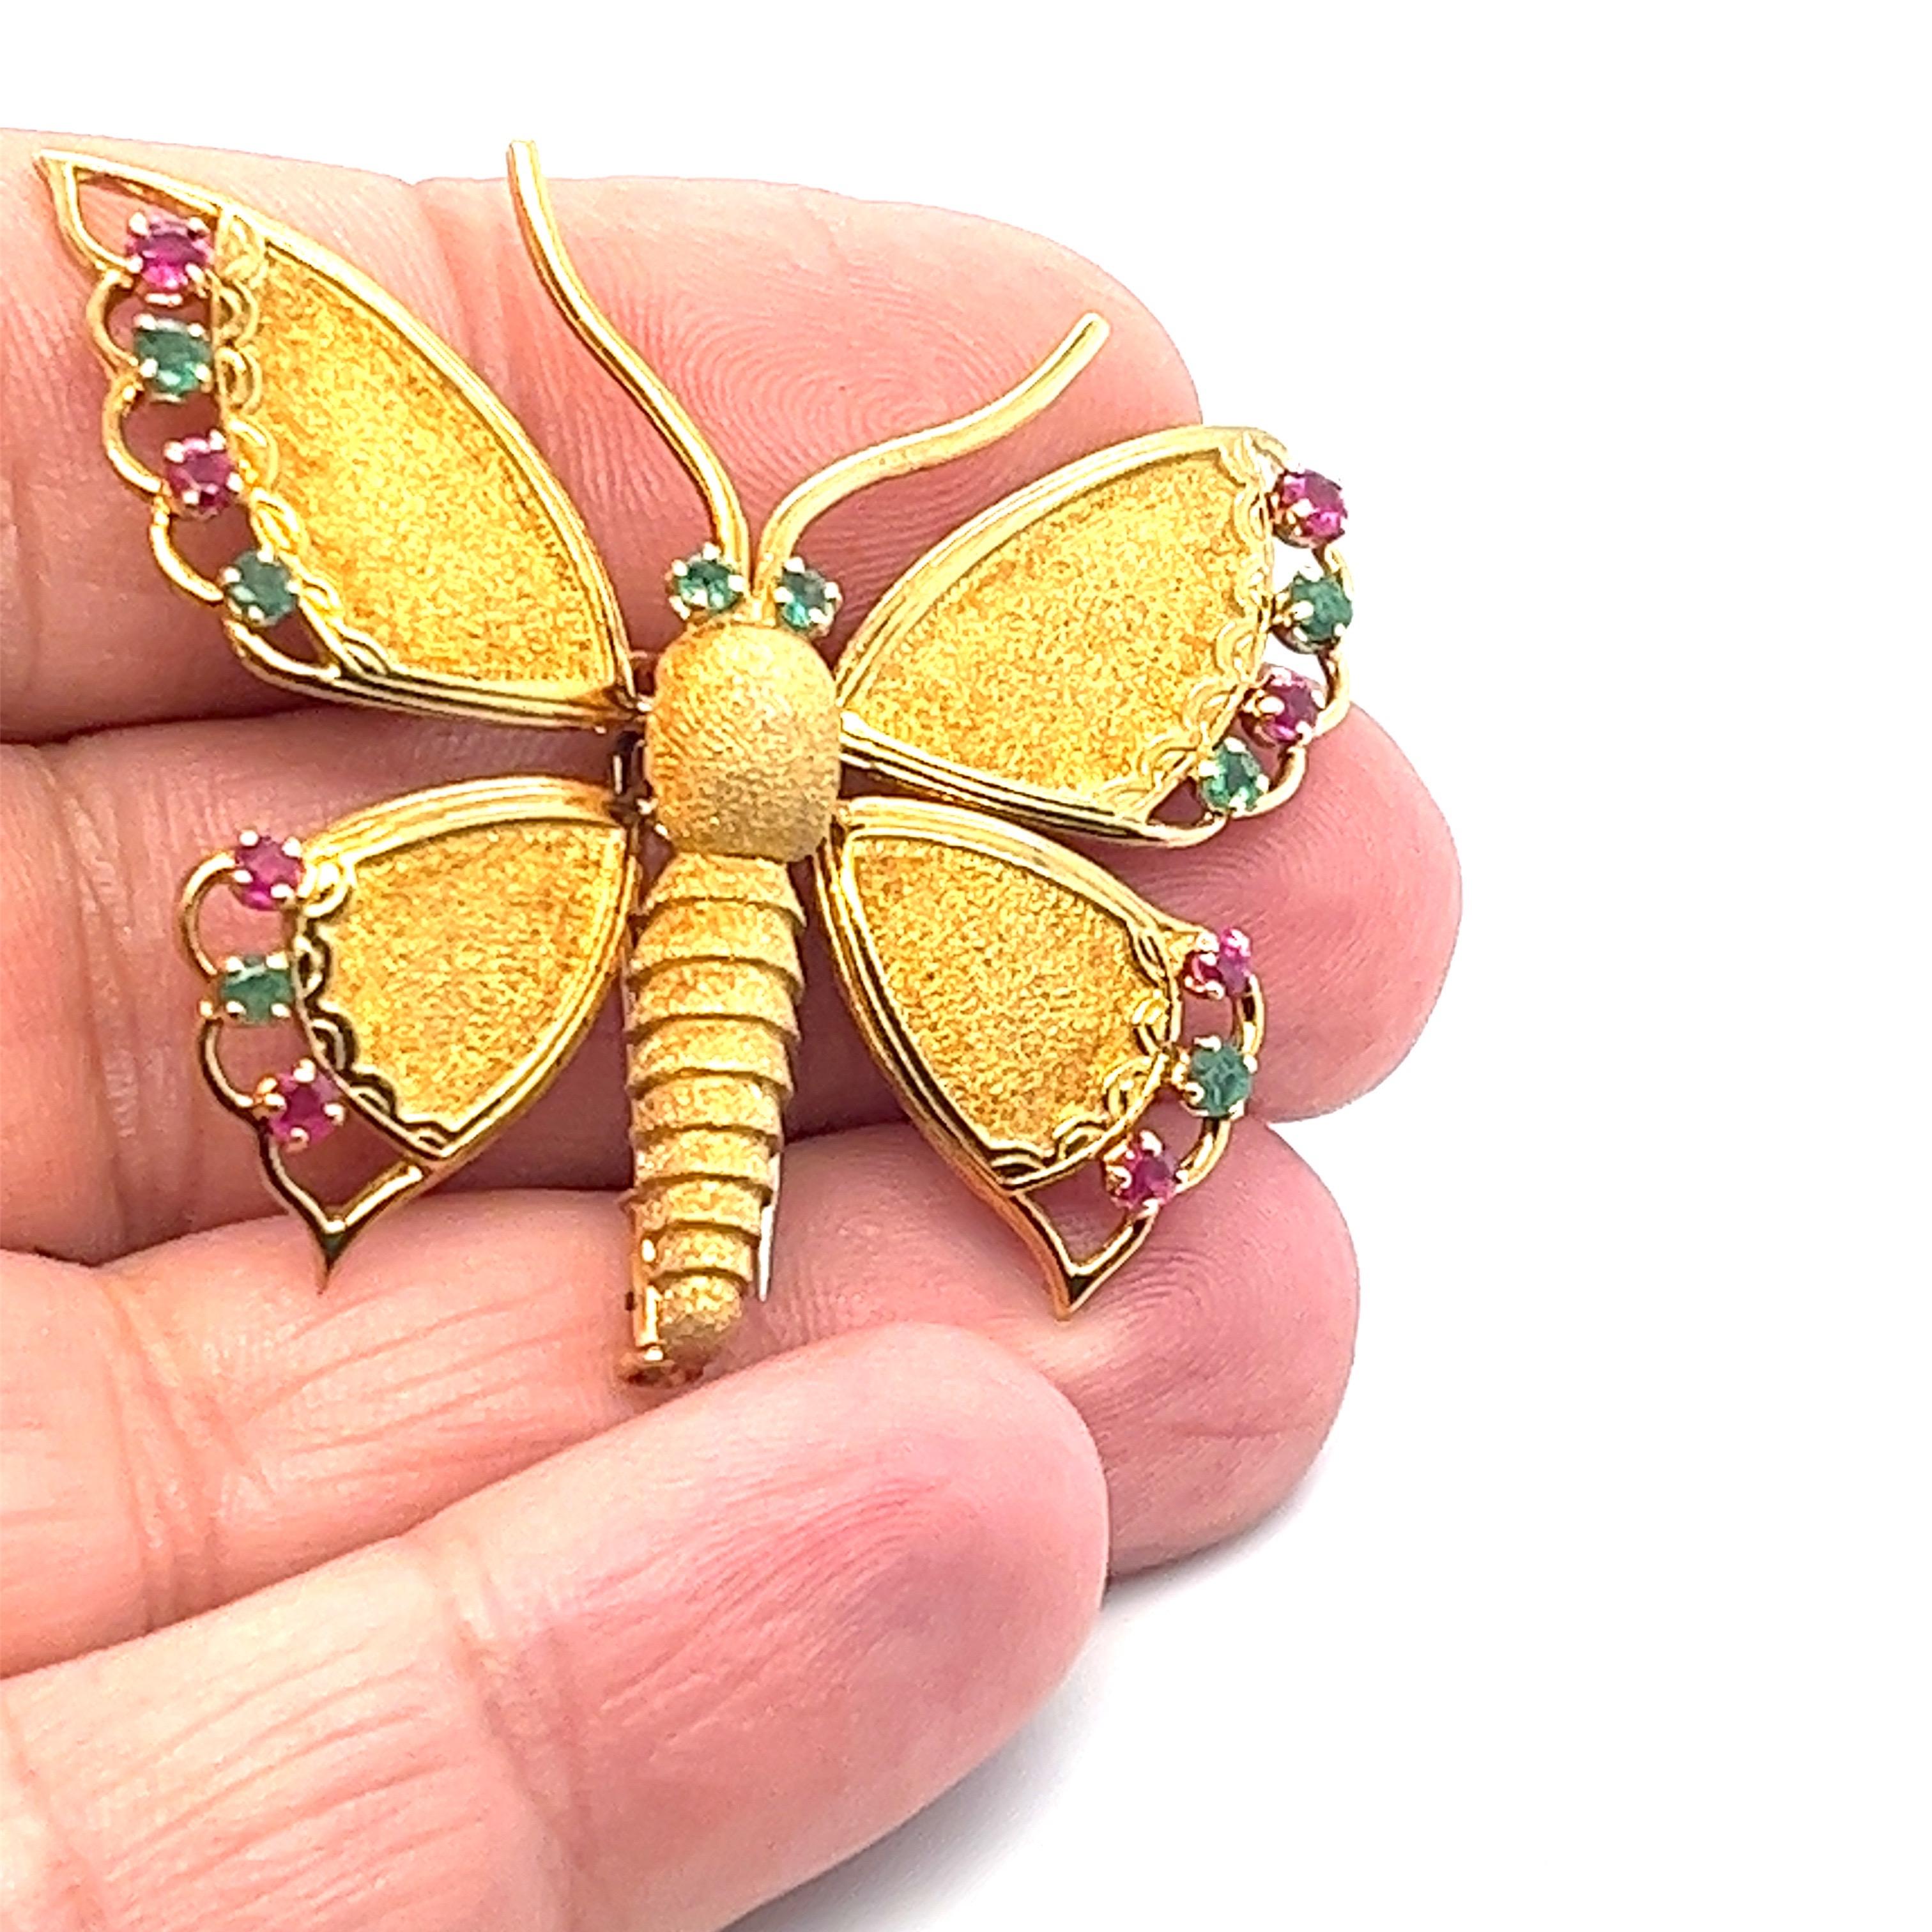 Exquisite FRED Paris Multi-Gem Butterfly Brooch - 18kt Solid Gold, Estate.

Indulge in the beauty of nature with the FRED Paris Multi-Gem Butterfly Brooch. Crafted from 18kt solid yellow gold, this captivating piece boasts articulated wings that